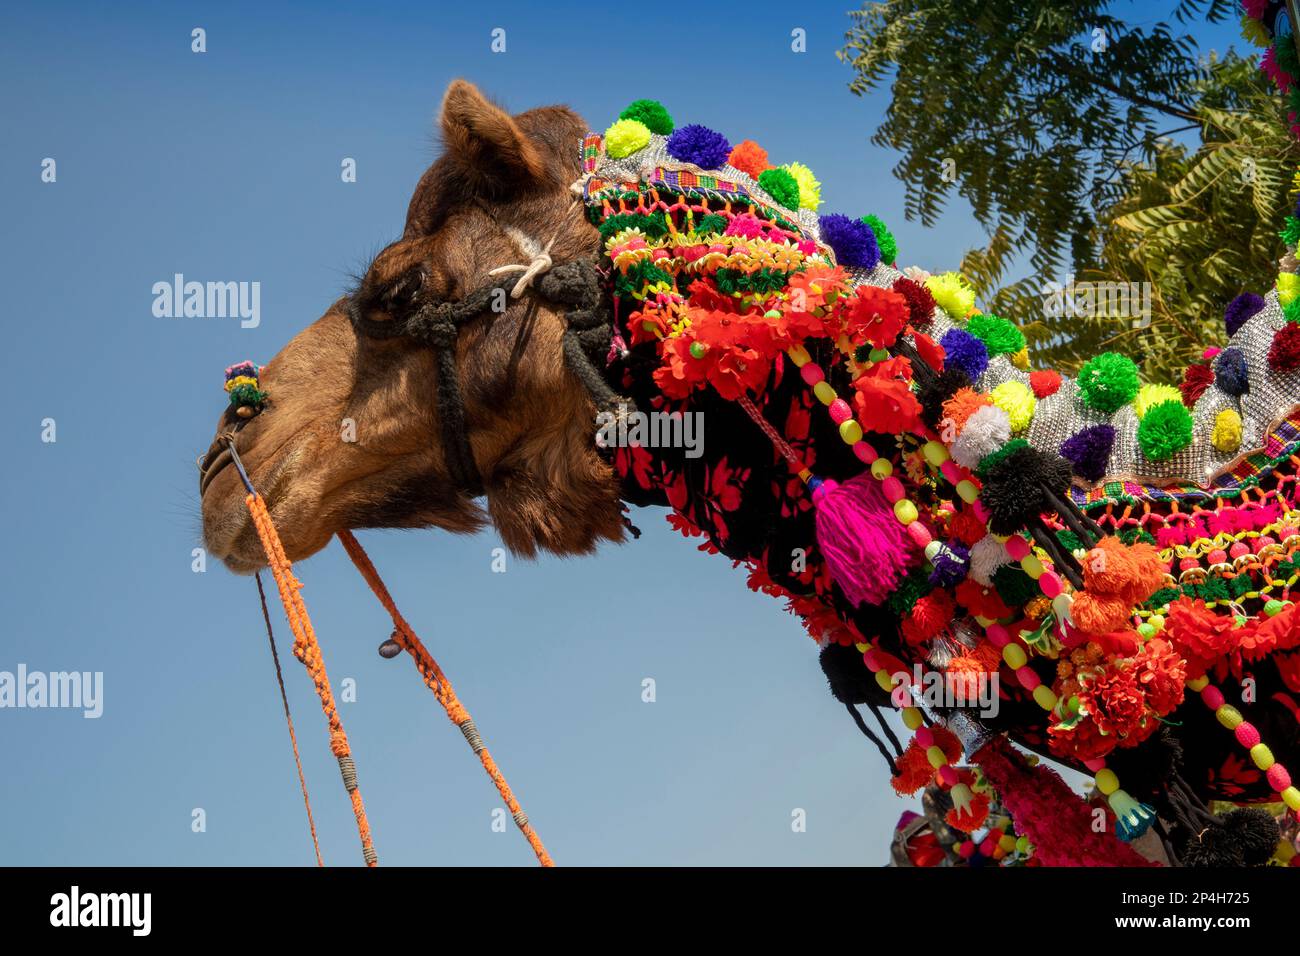 India, Rajasthan, Bikaner, National Camel Research Centre, Camel Festival, head of decorated camel Stock Photo